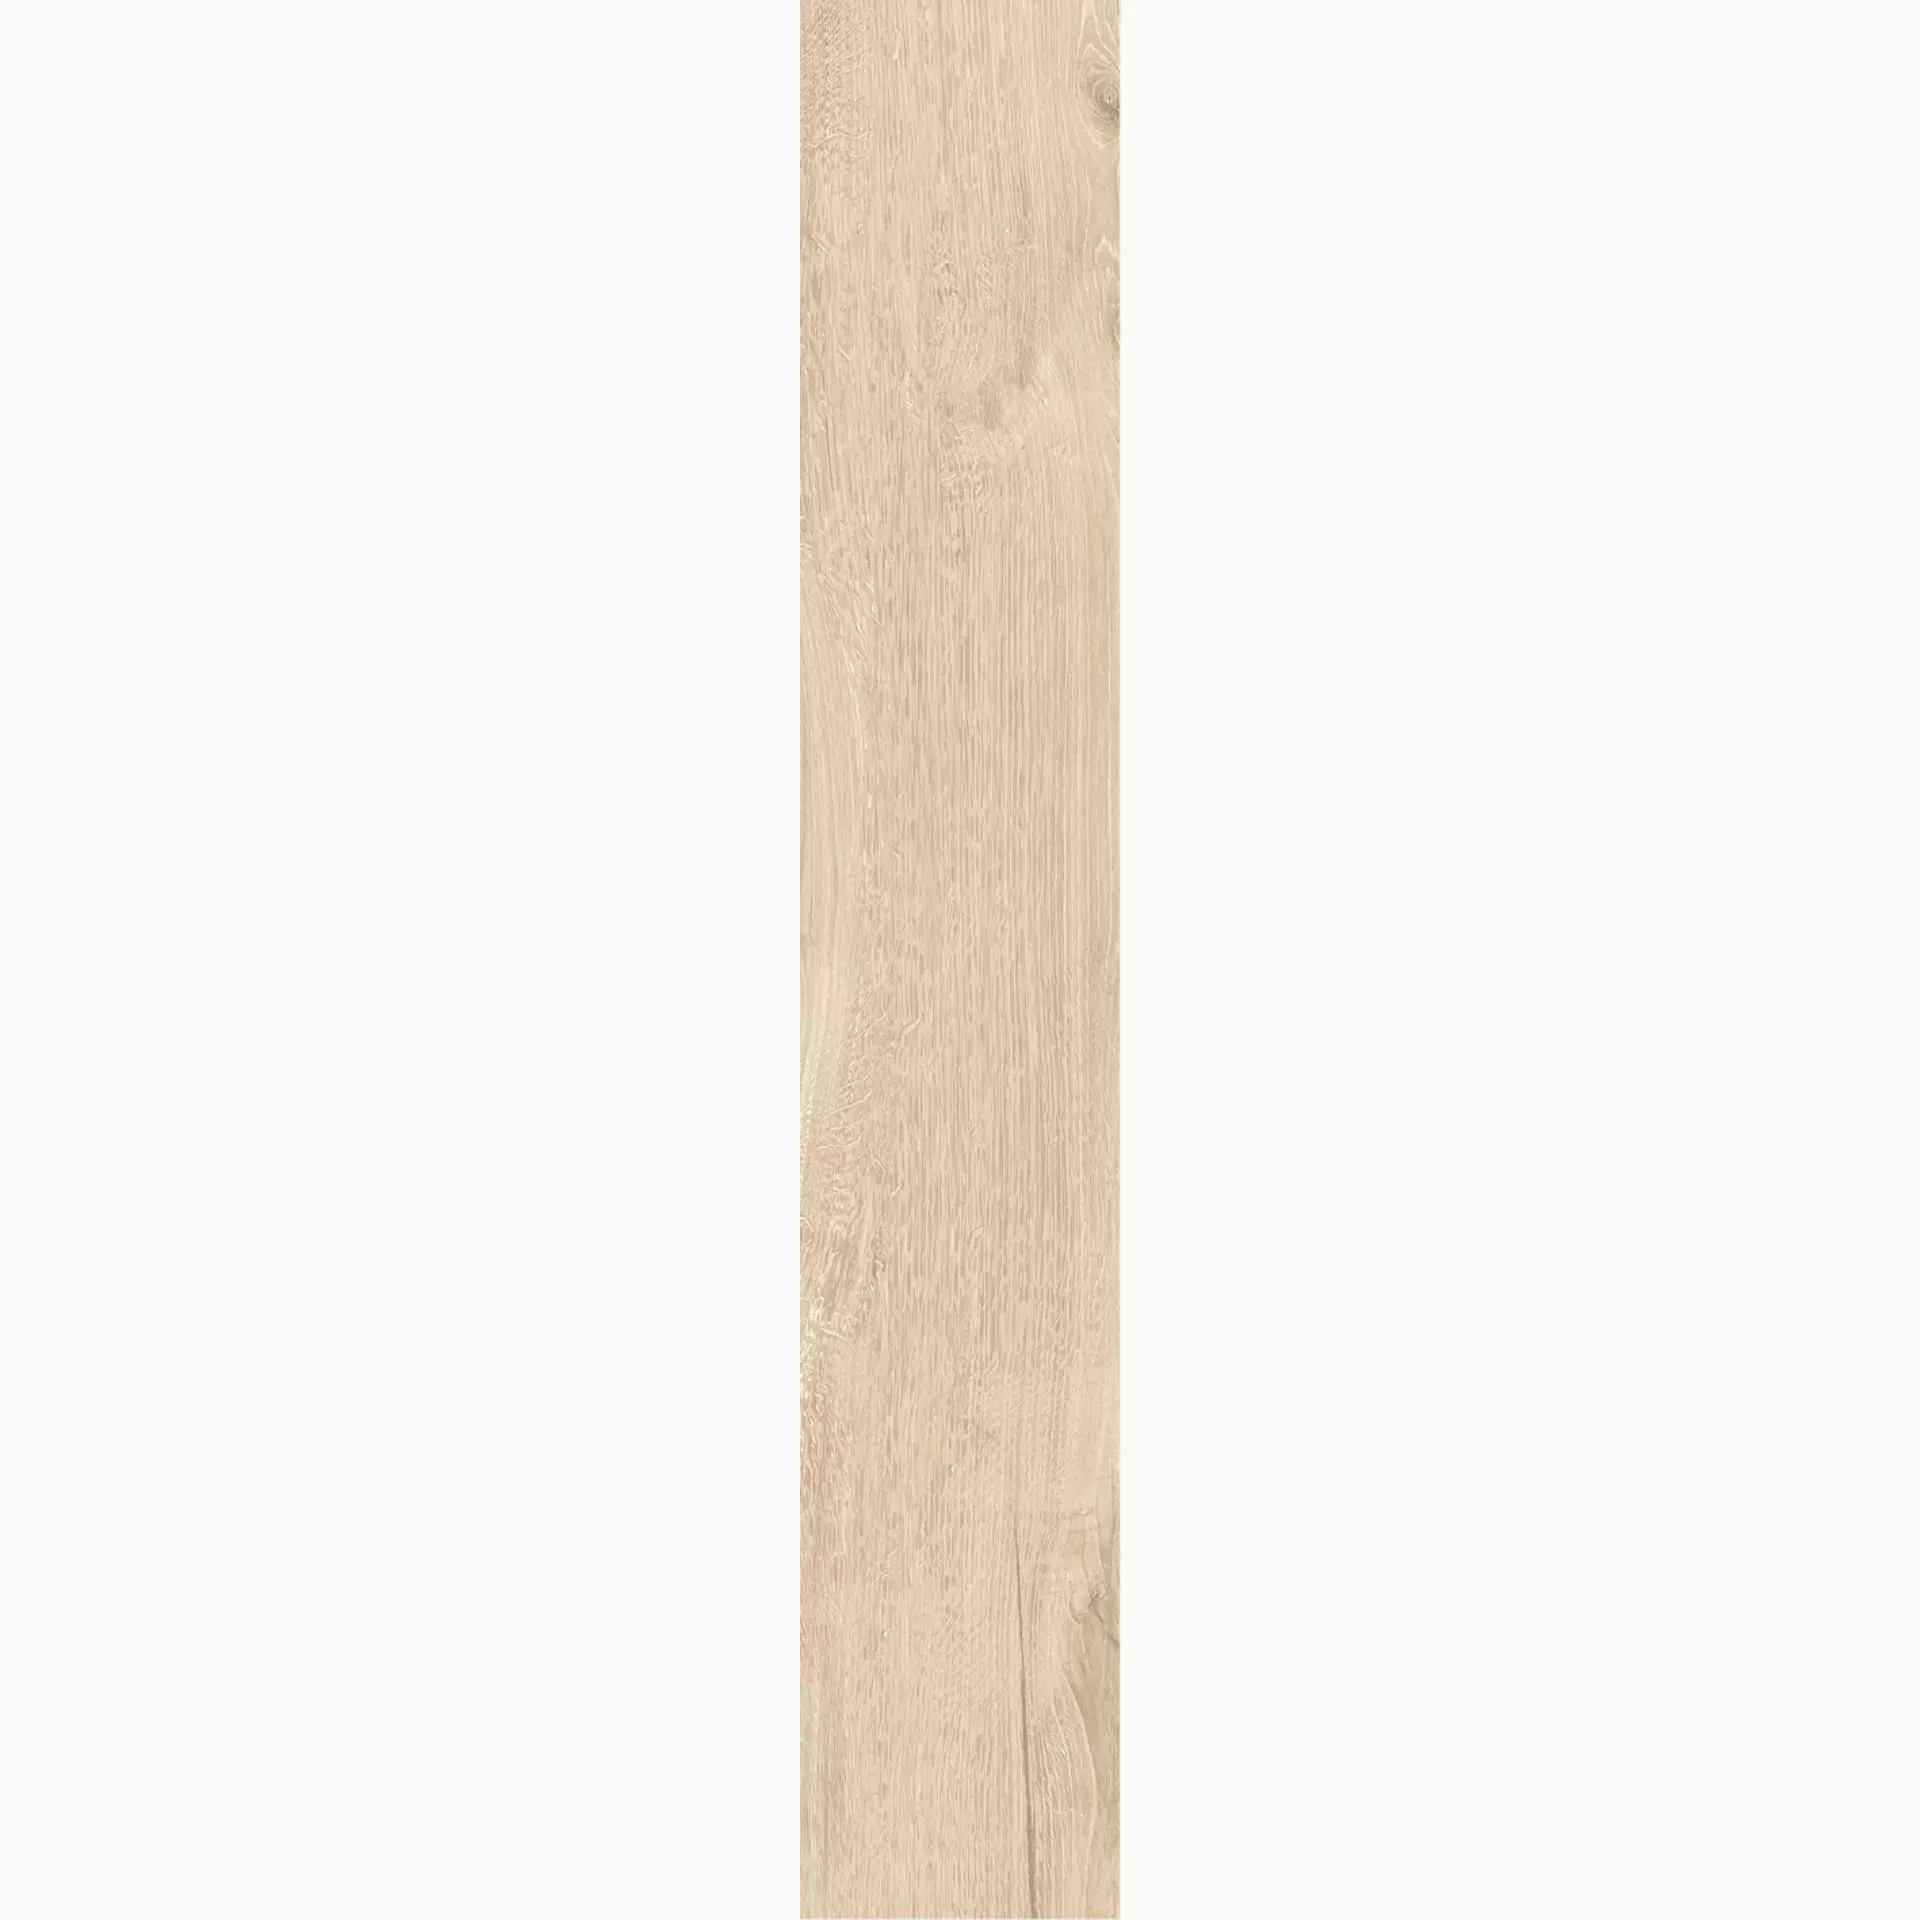 Novabell Artwood Maple Naturale AWD81RT 20x120cm rectified 9mm